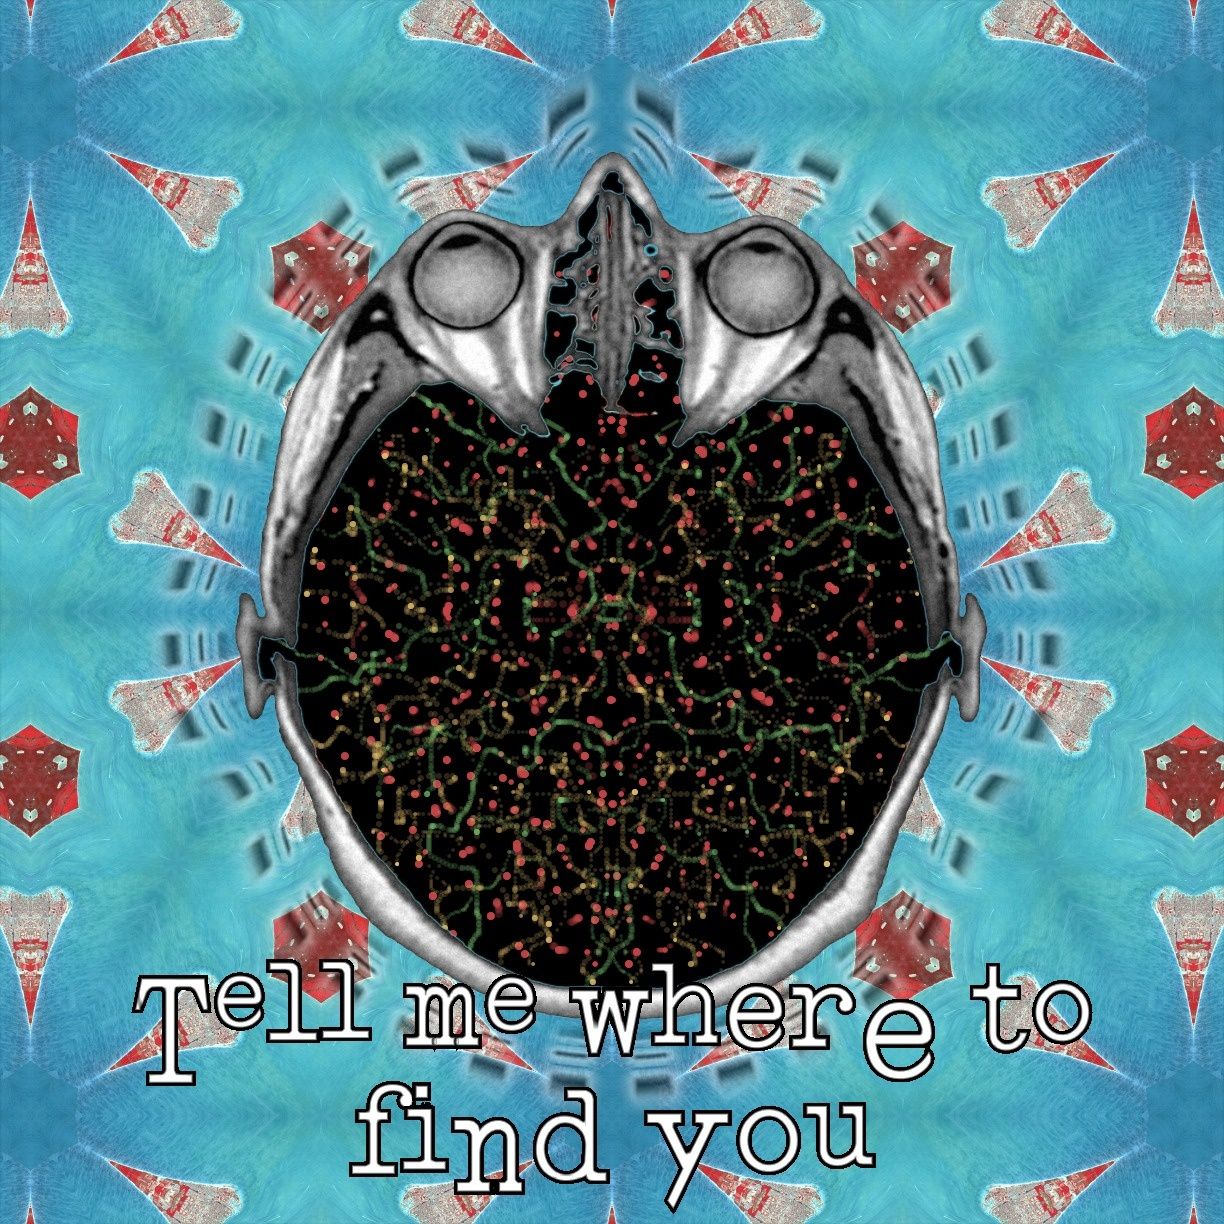 Tell me where to find you